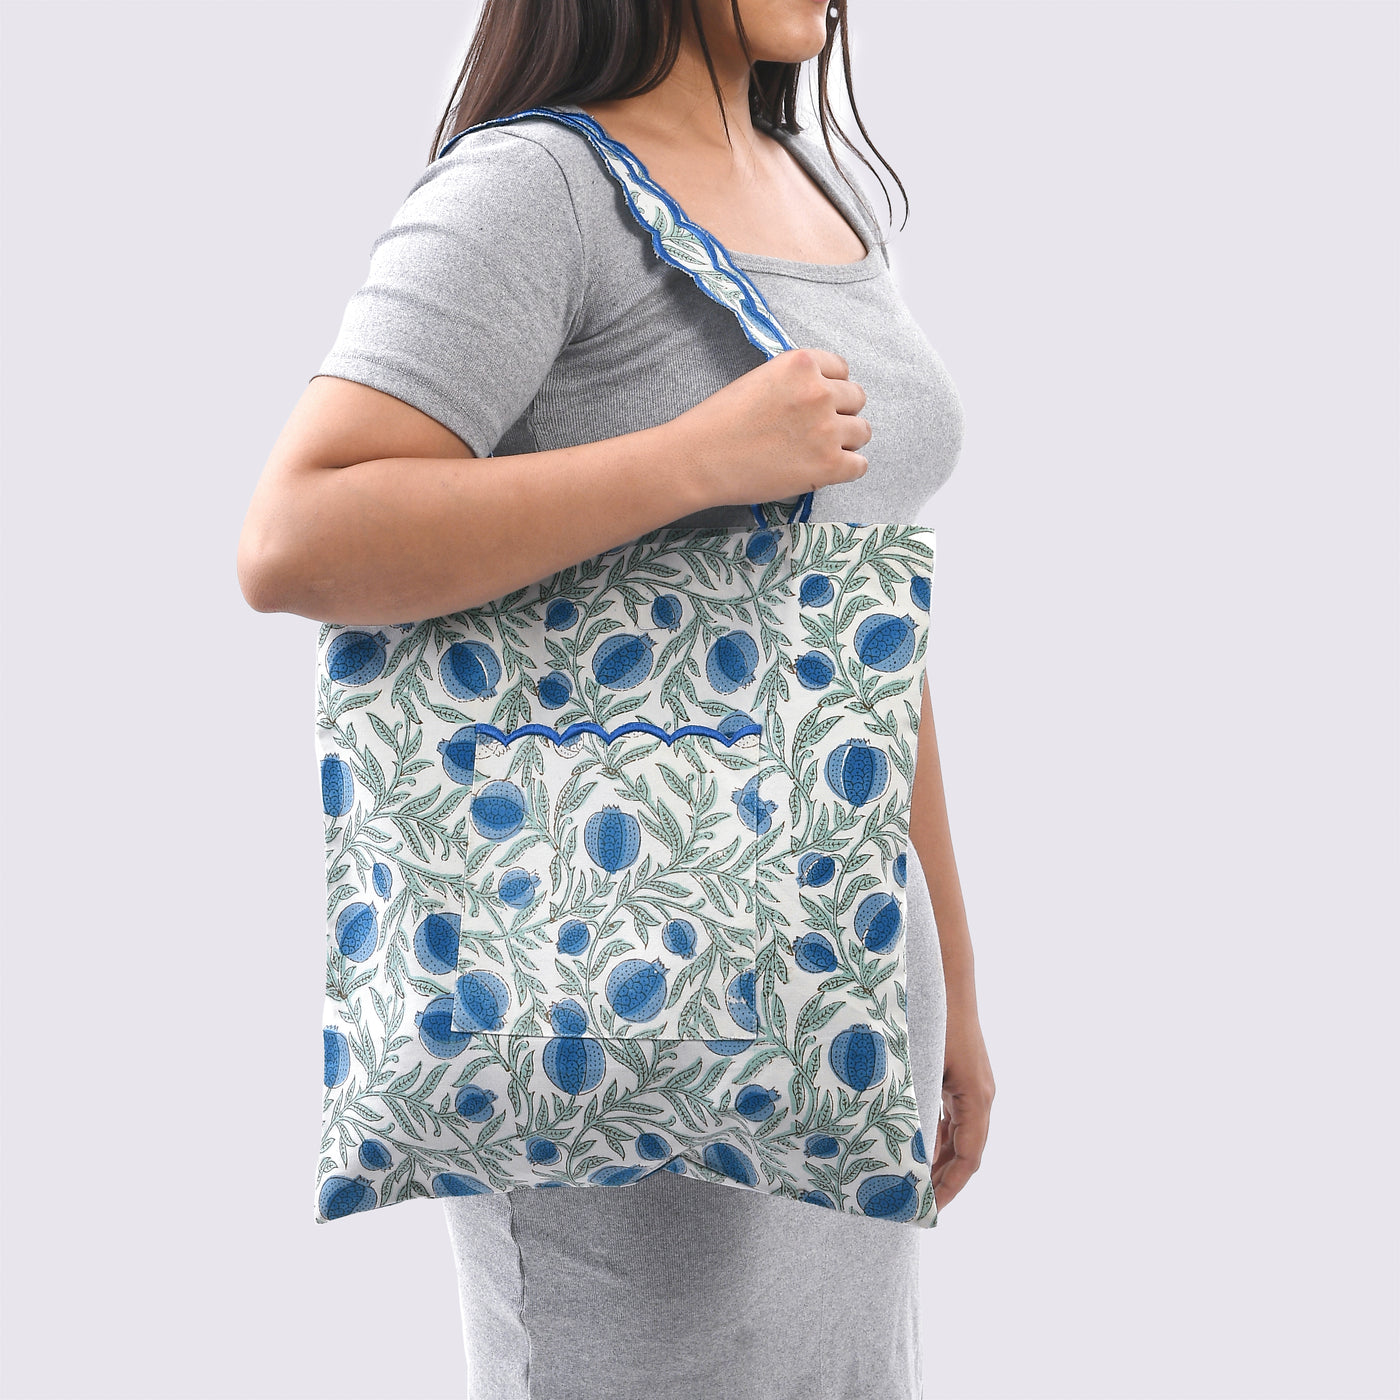 Fabricrush Queen Blue  Indian Hand Block Printed and Embroidery Scalloped Canvas Women's Aesthetic Bag for Shopping, Travelling, Office, Church, School